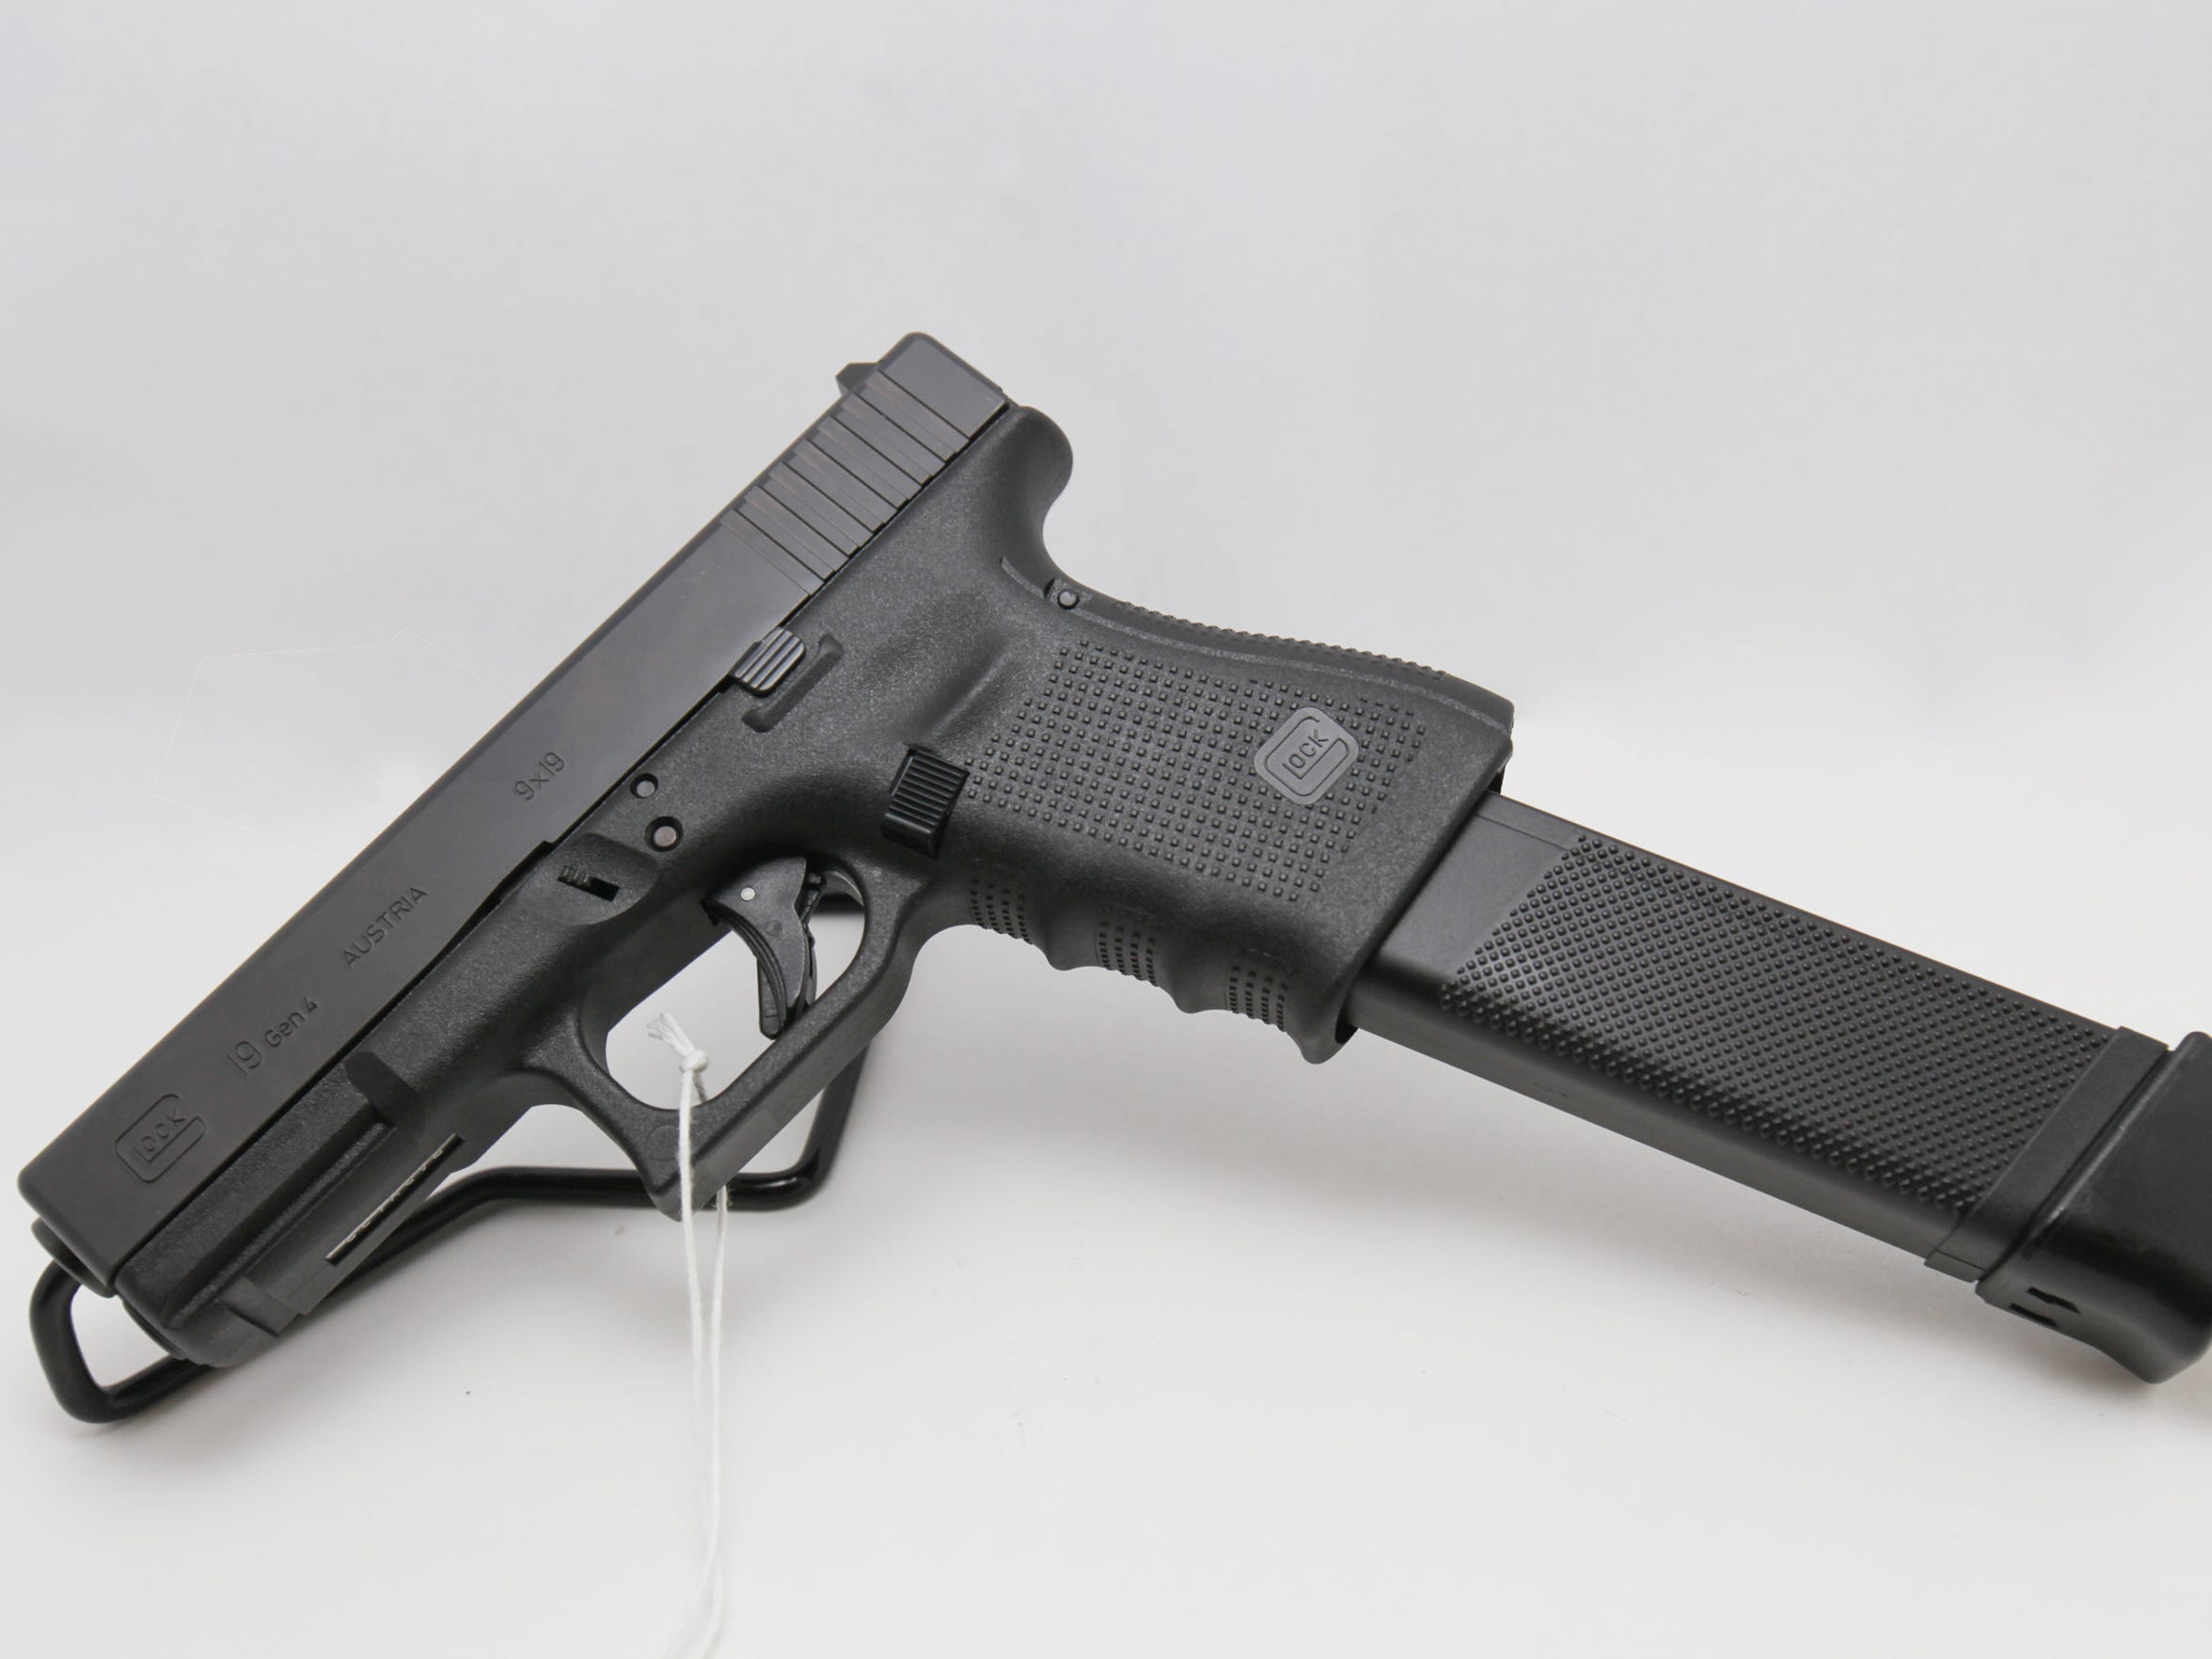 Glock 19 with extended magazine.